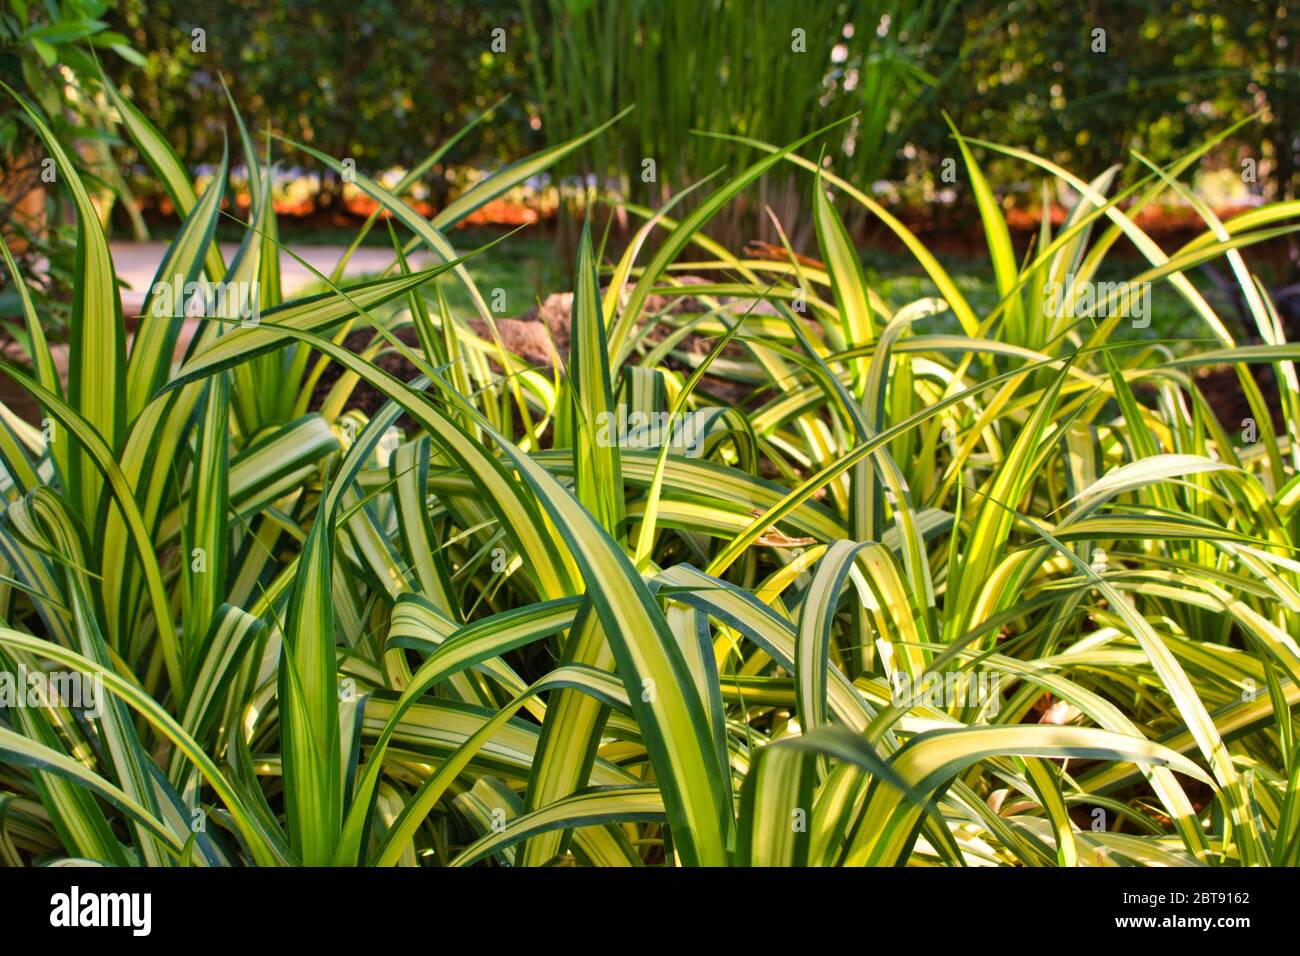 This unique photo shows an evergold grass plant, photographed in an ornamental garden in Thailand Stock Photo